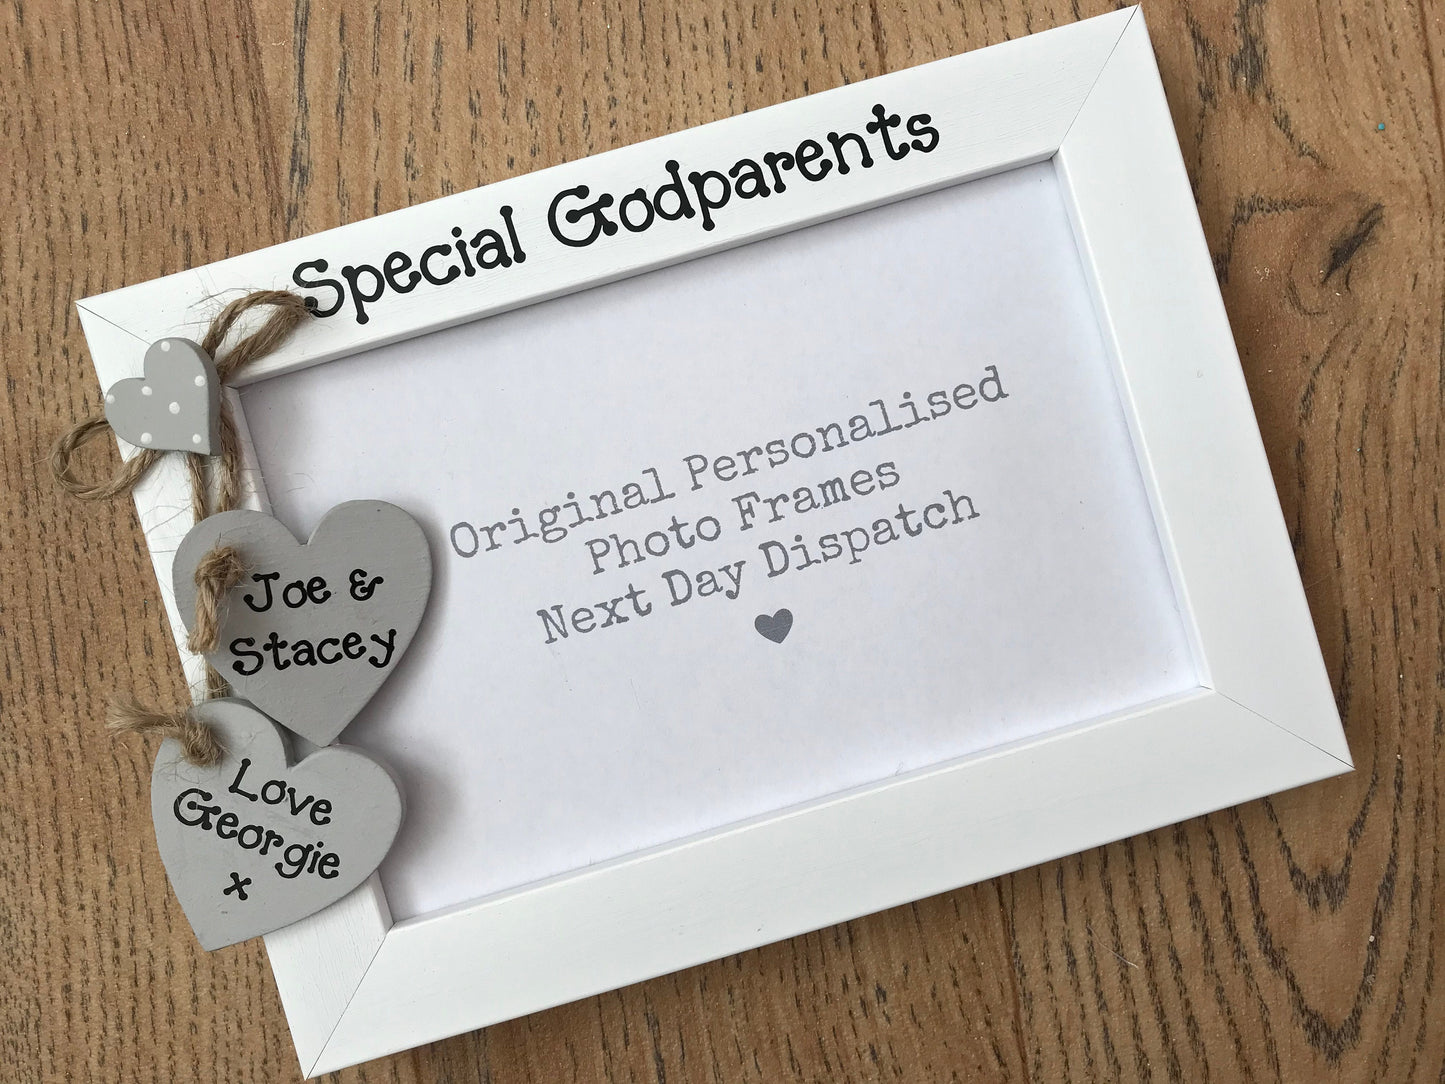 Handcrafted Personalised Special Godparents Picture Frame